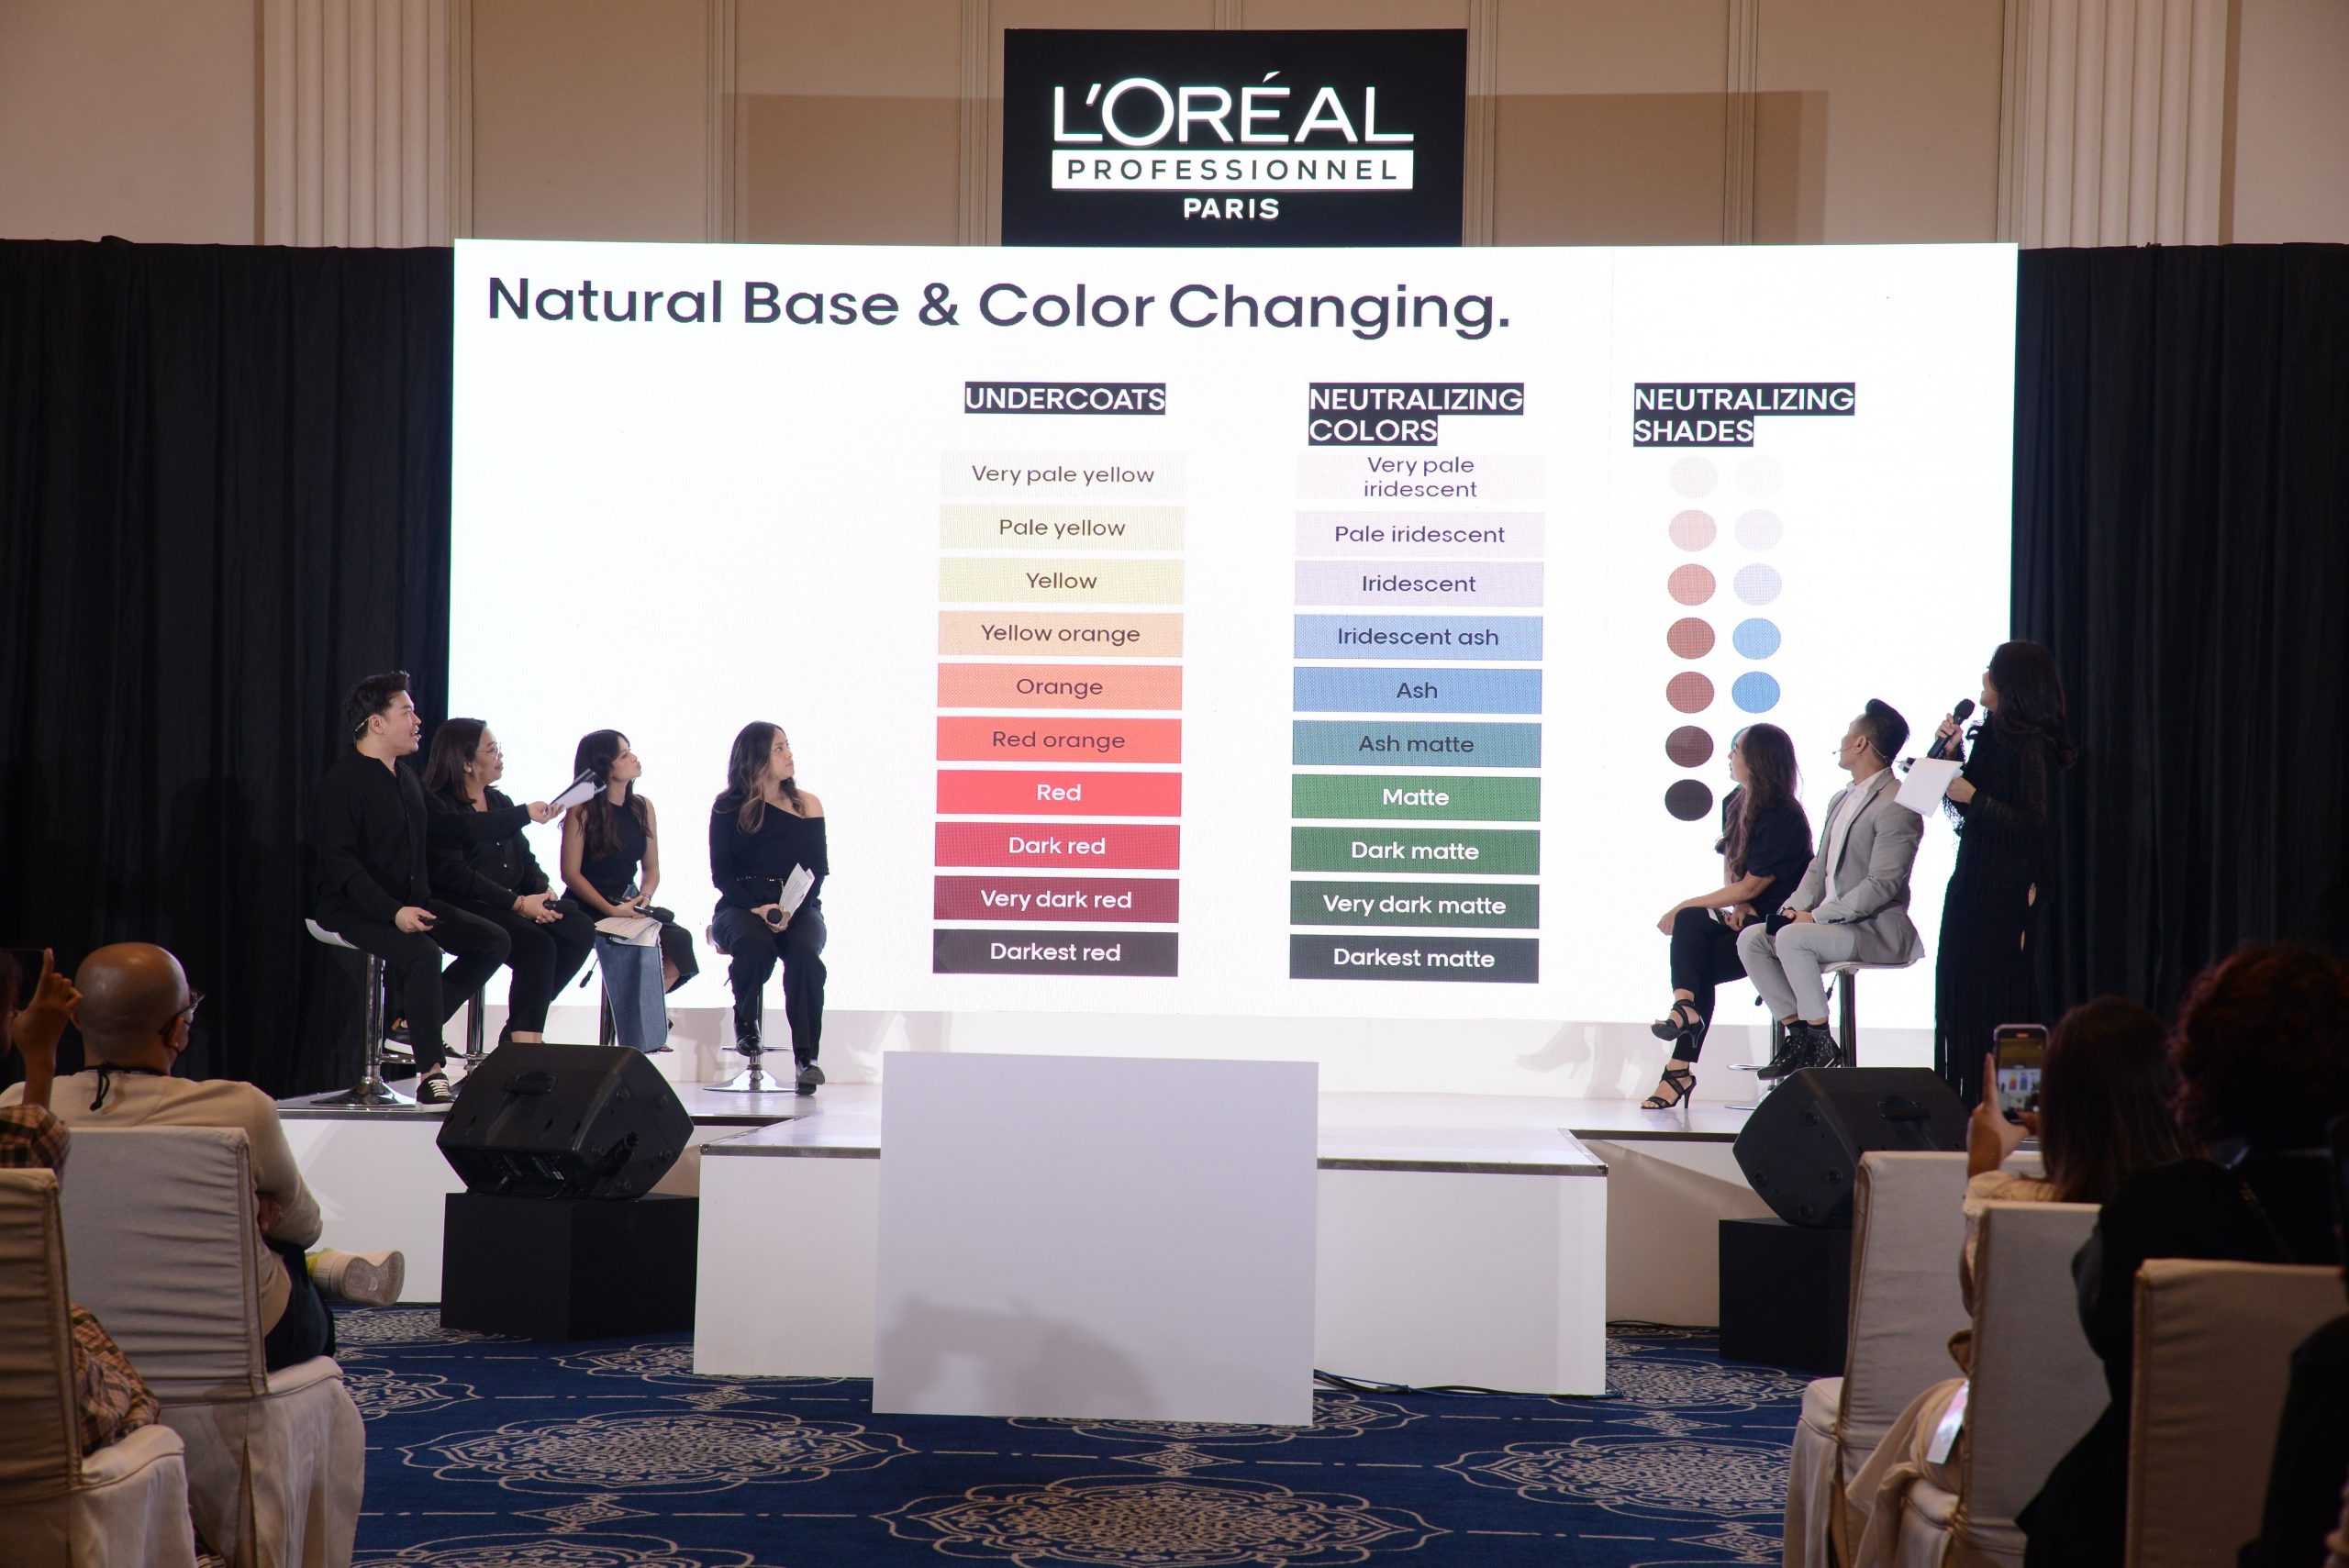 L'Oreal French Glossing Forum Bisnis Profesional L'Oreal (LPBF) 